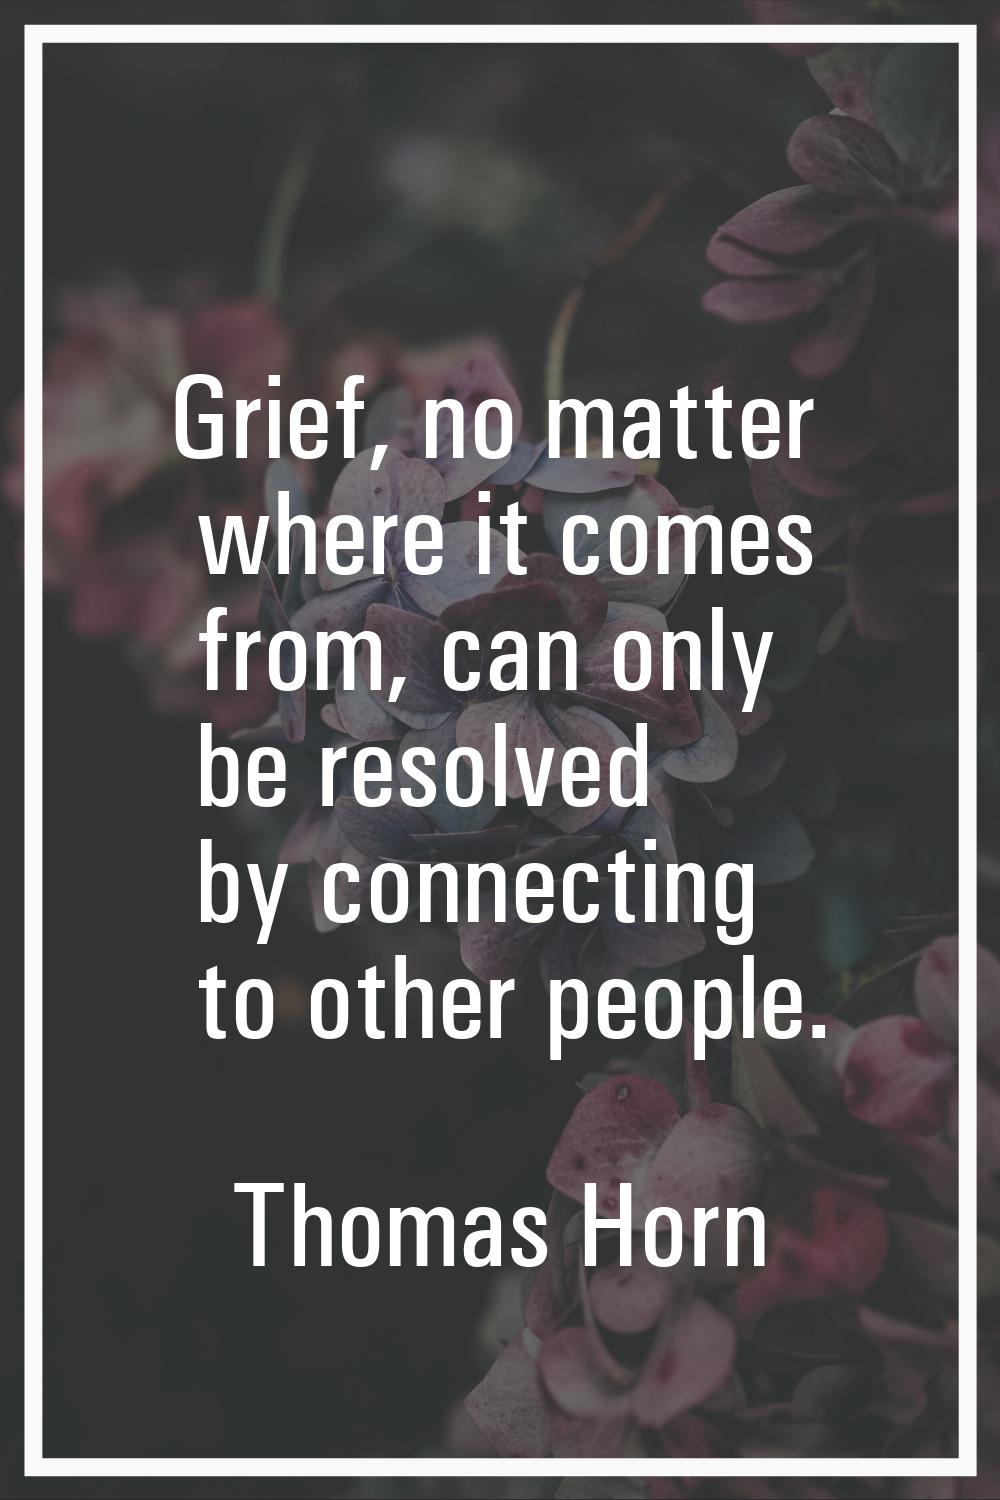 Grief, no matter where it comes from, can only be resolved by connecting to other people.